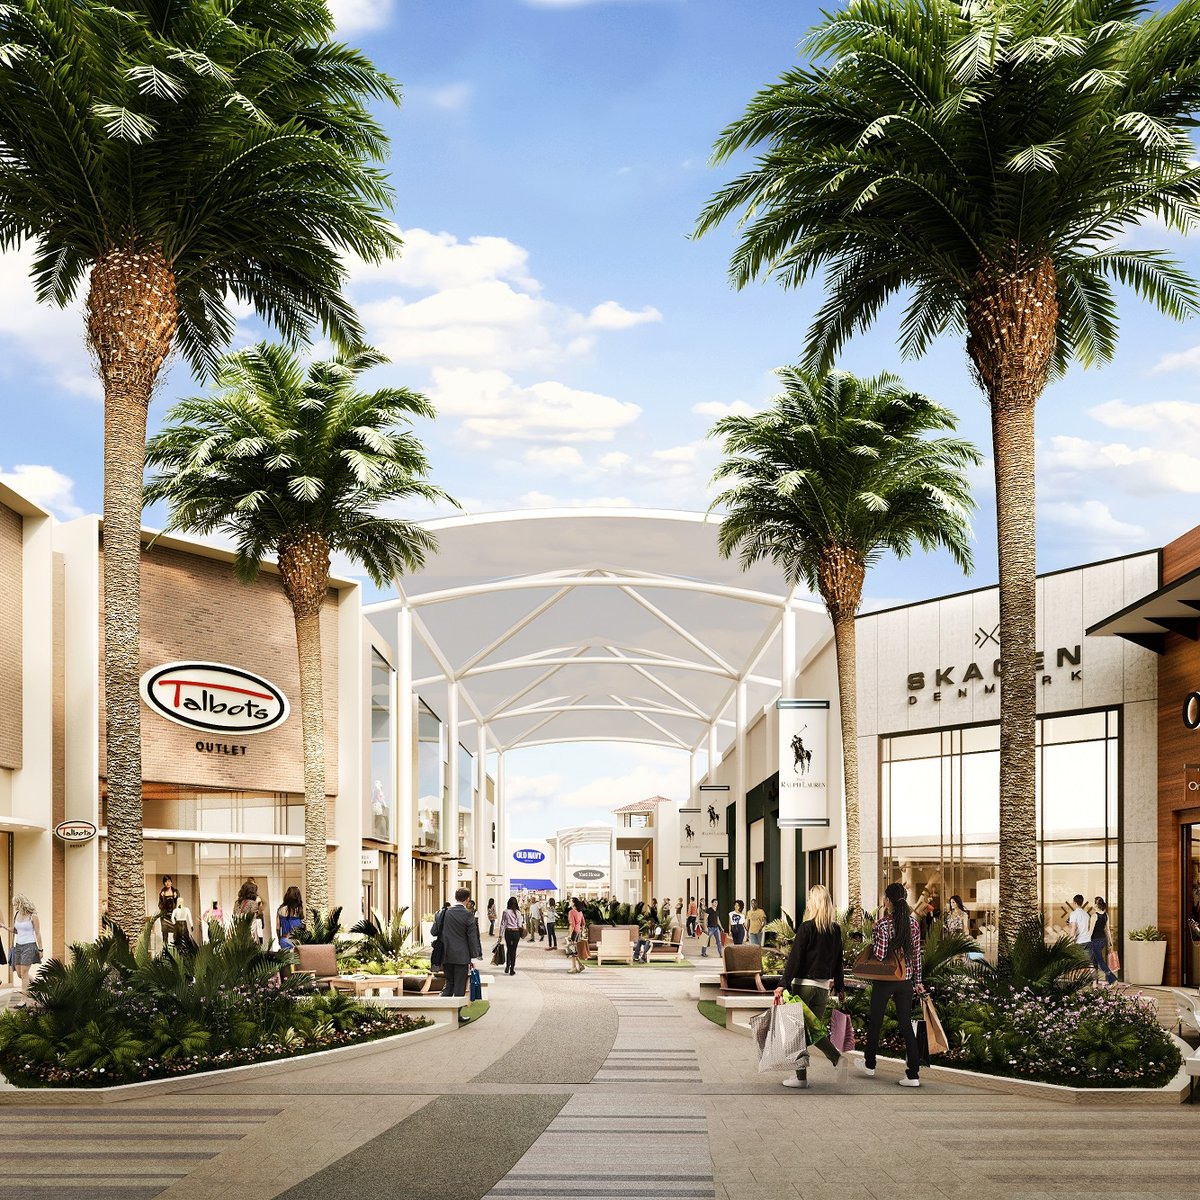 Colonnade Outlets at Sawgrass Mills - Sunrise